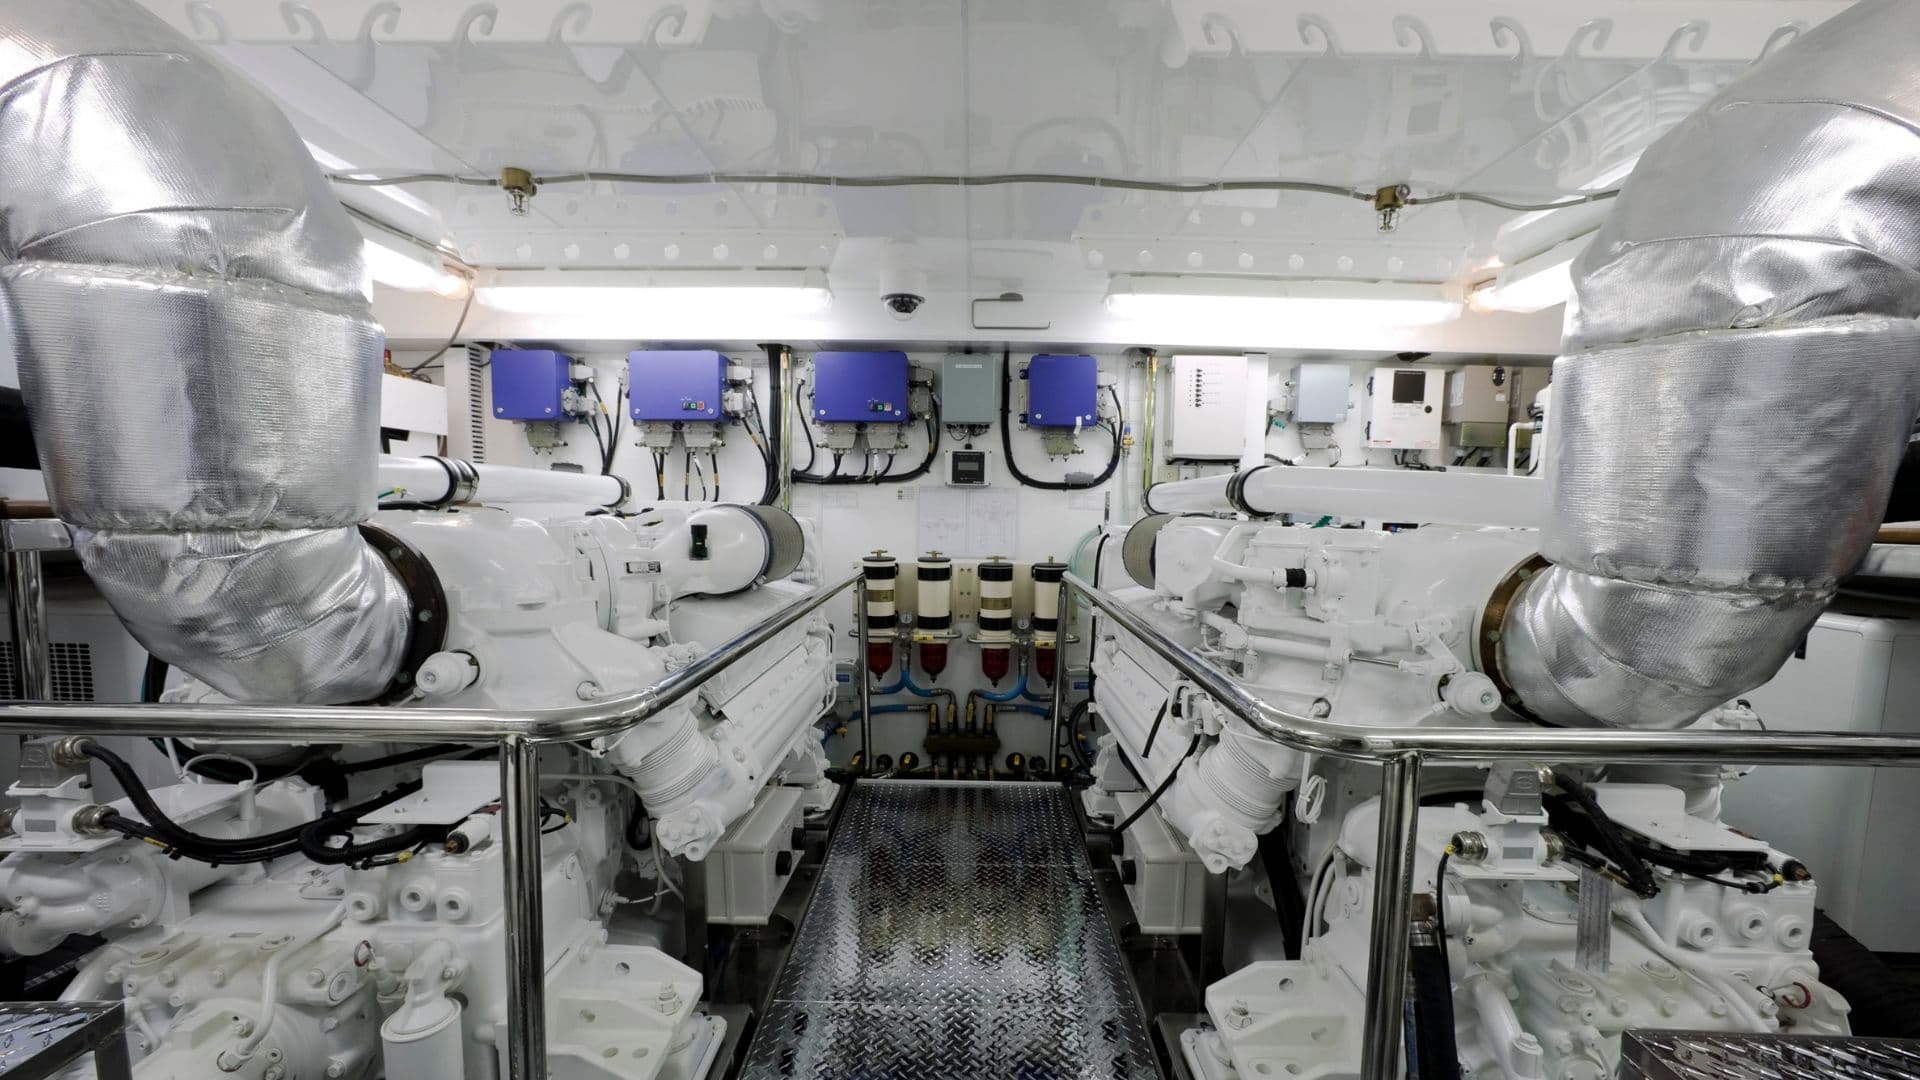 An image of an immaculate engine room onboard a recreational yacht. 